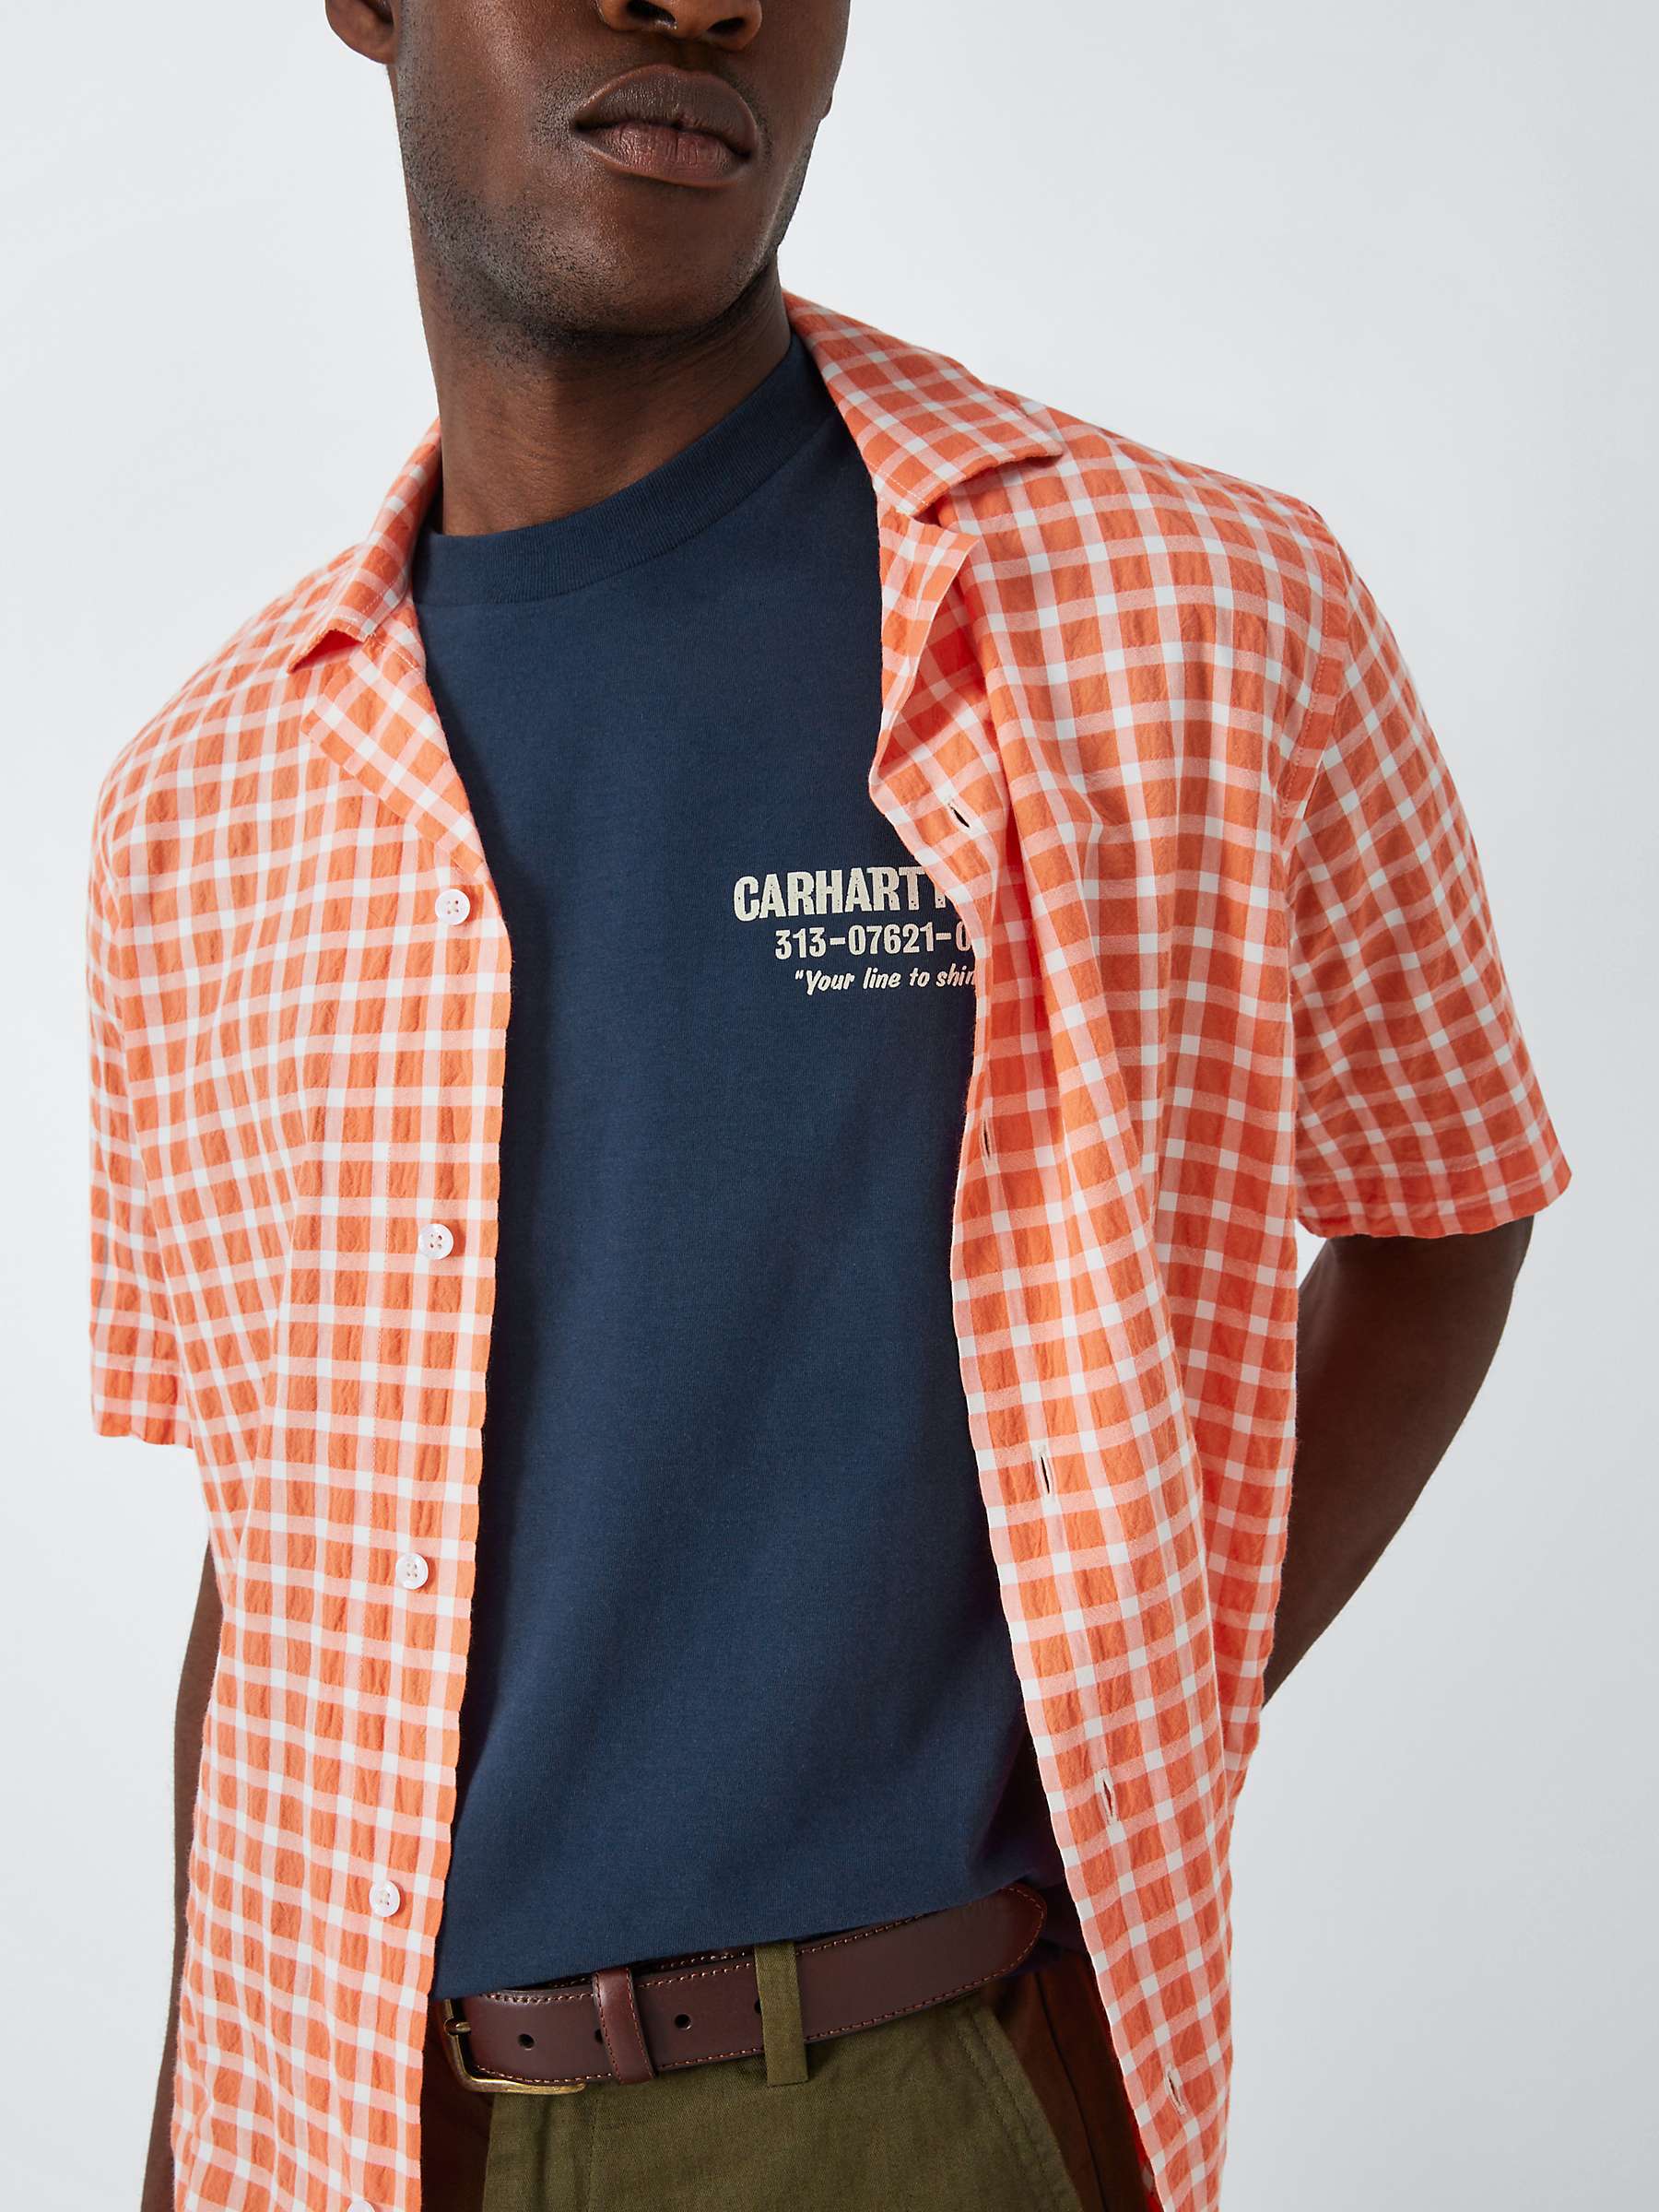 Buy Carhartt WIP Short Sleeve Less Troubles T-Shirt, Blue Online at johnlewis.com